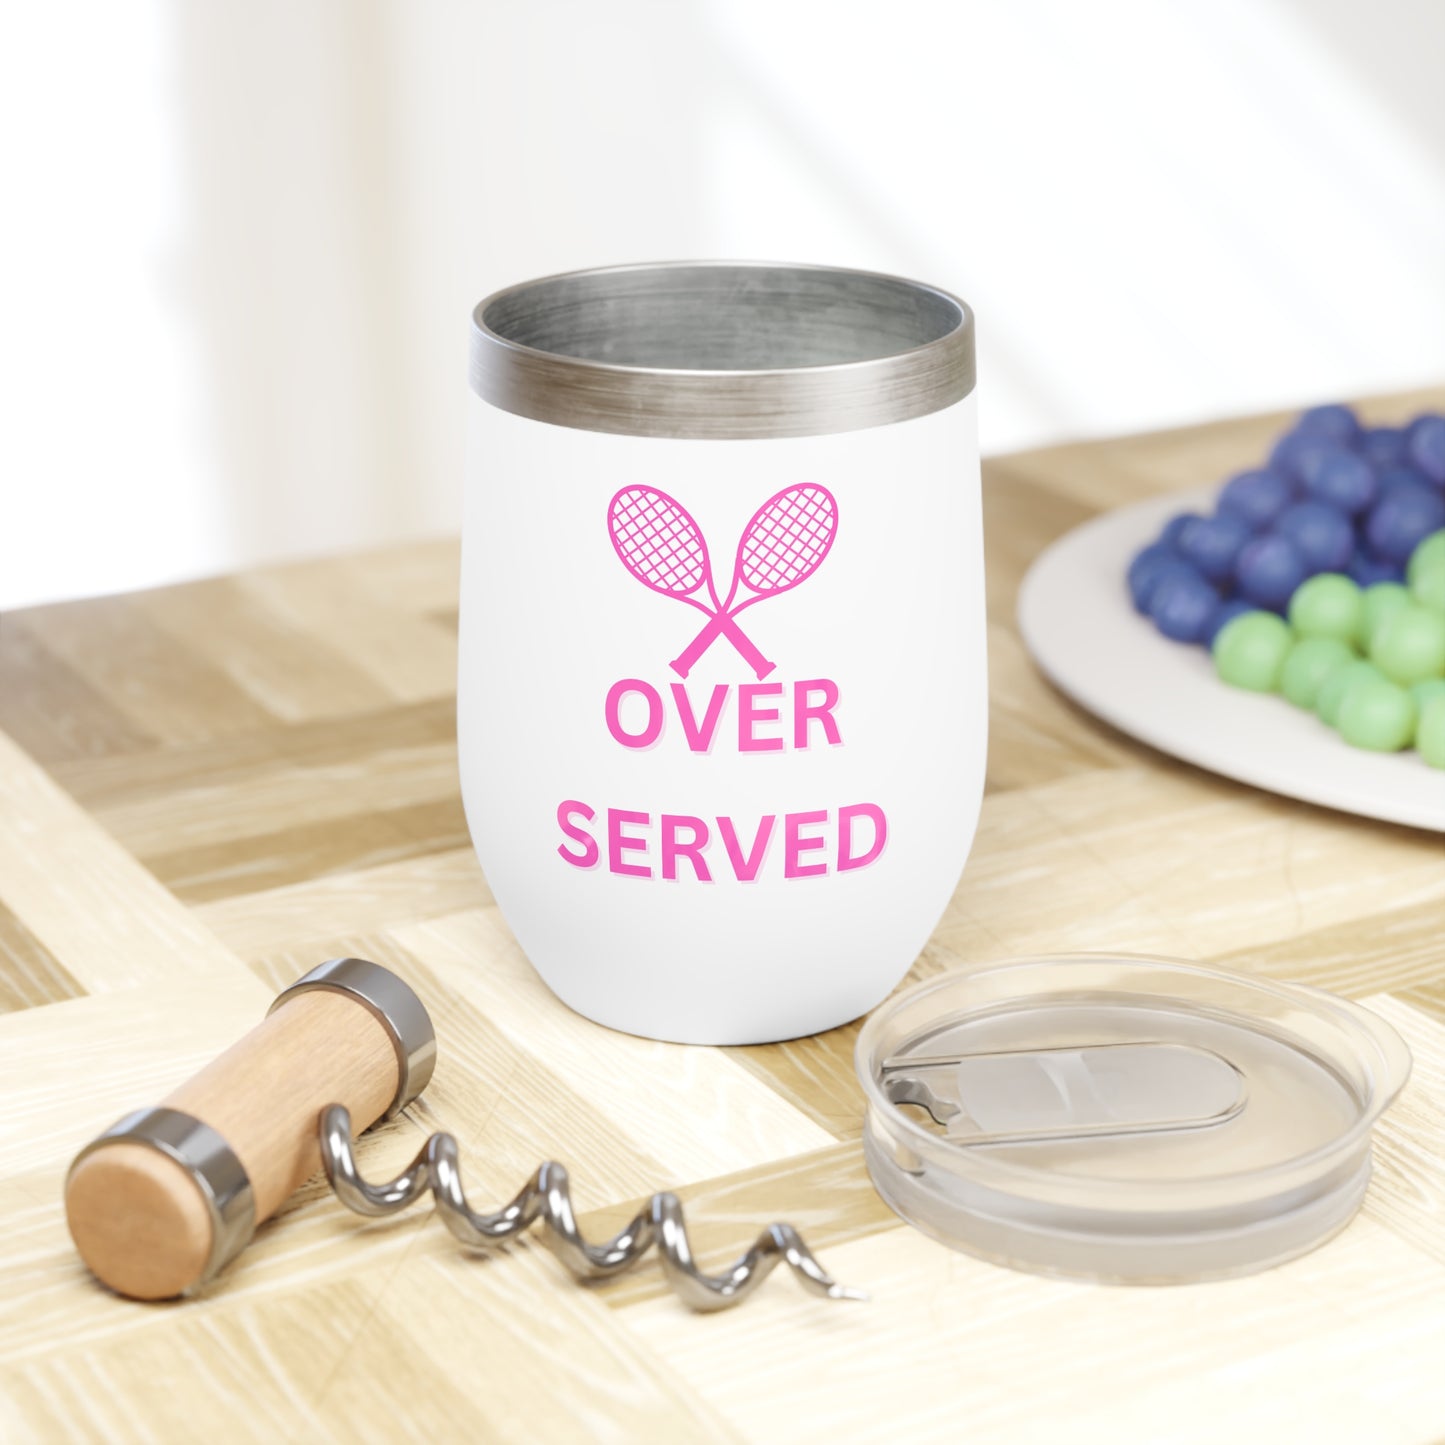 Over served tennis Wine Tumbler